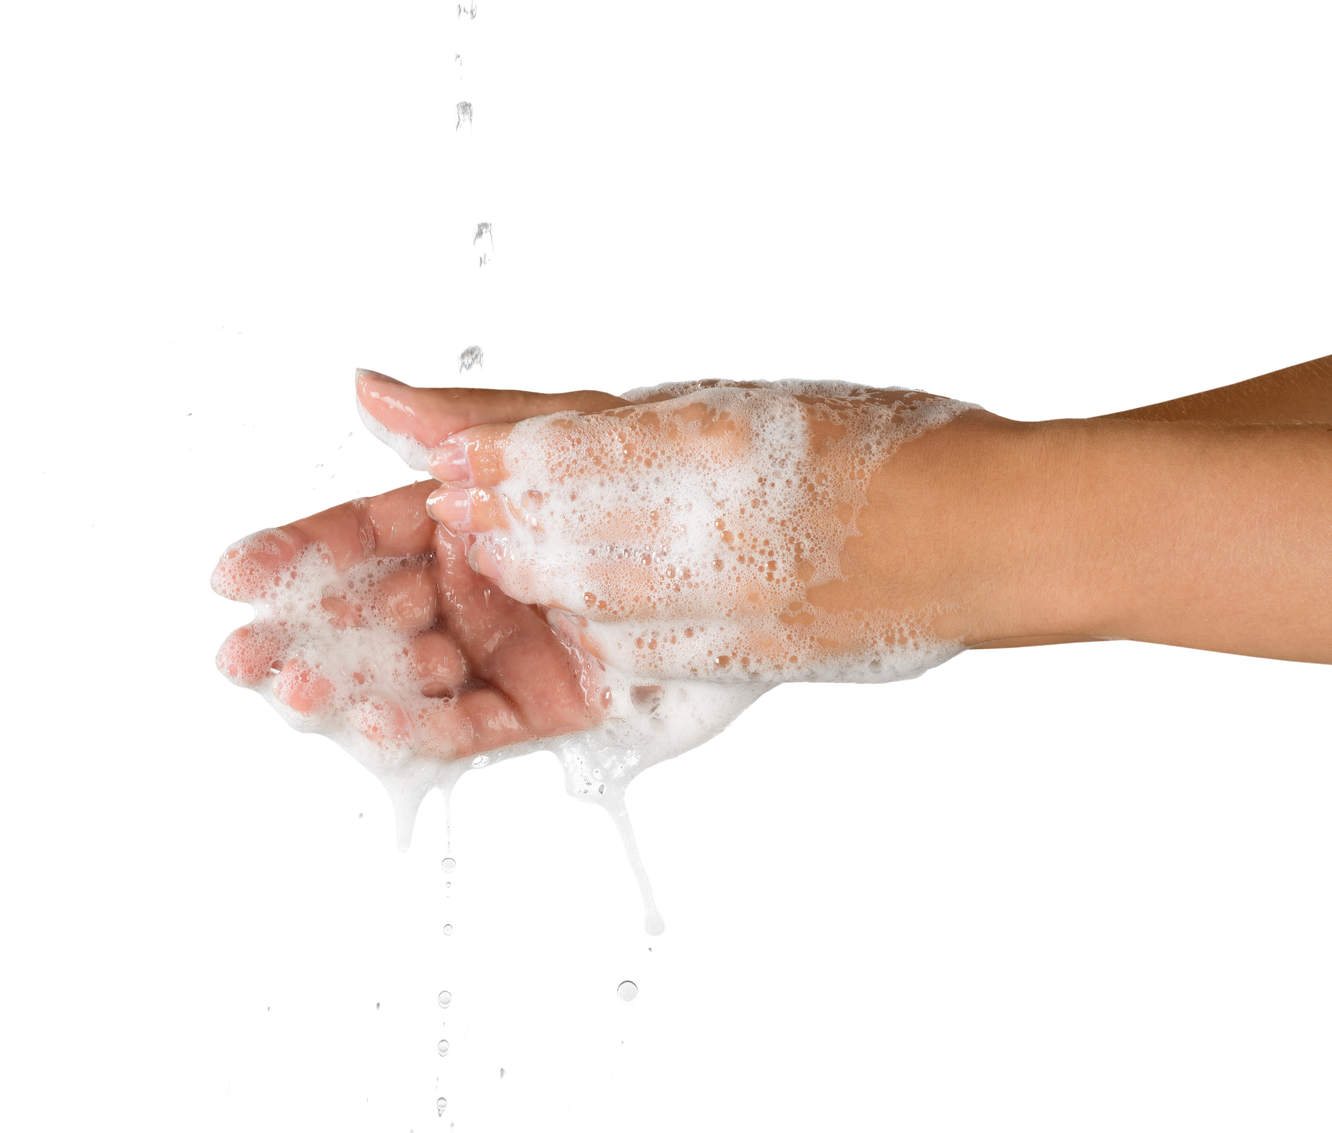 Hands Washed with Soap and Water